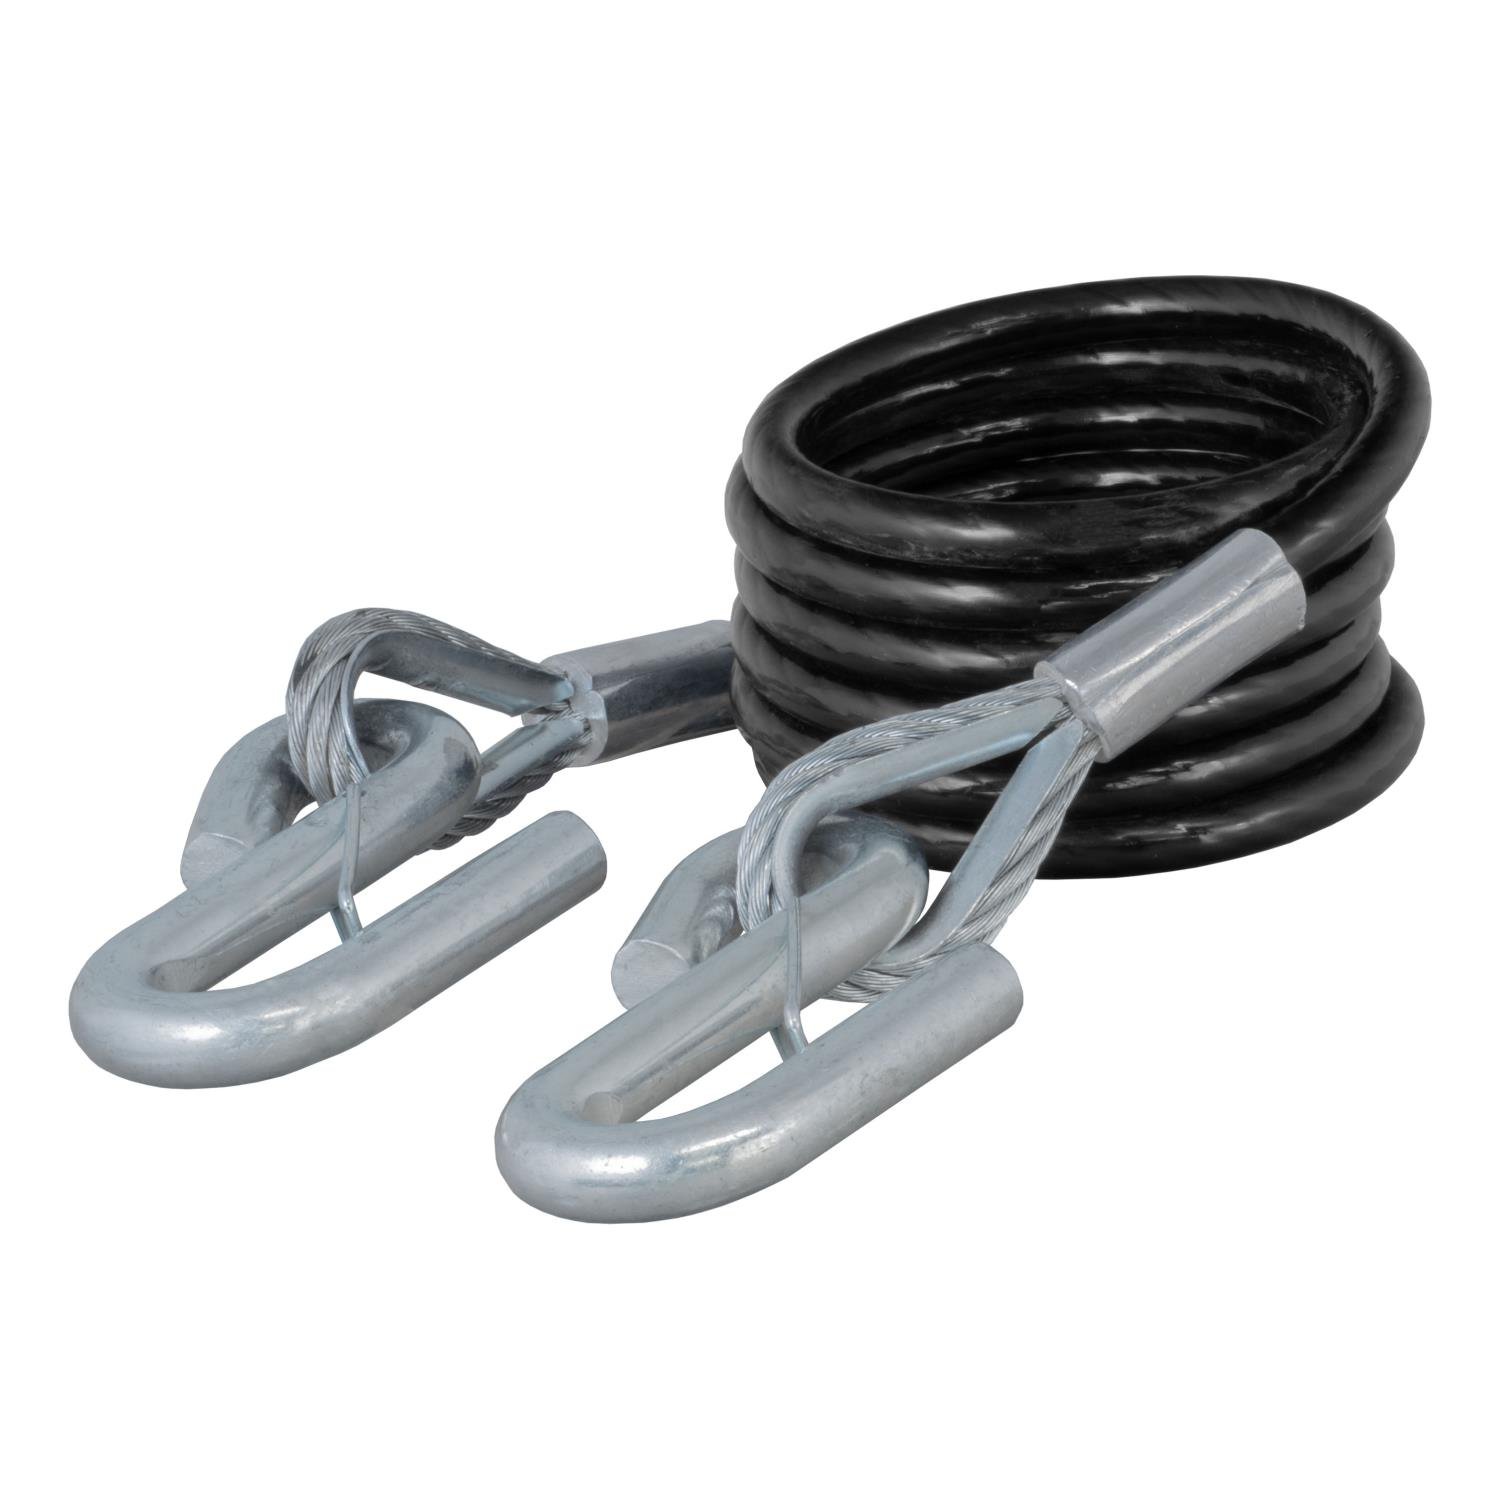 Coiled Tow Bar Safety Cable with Hooks [84 in. x 3/8 in.]